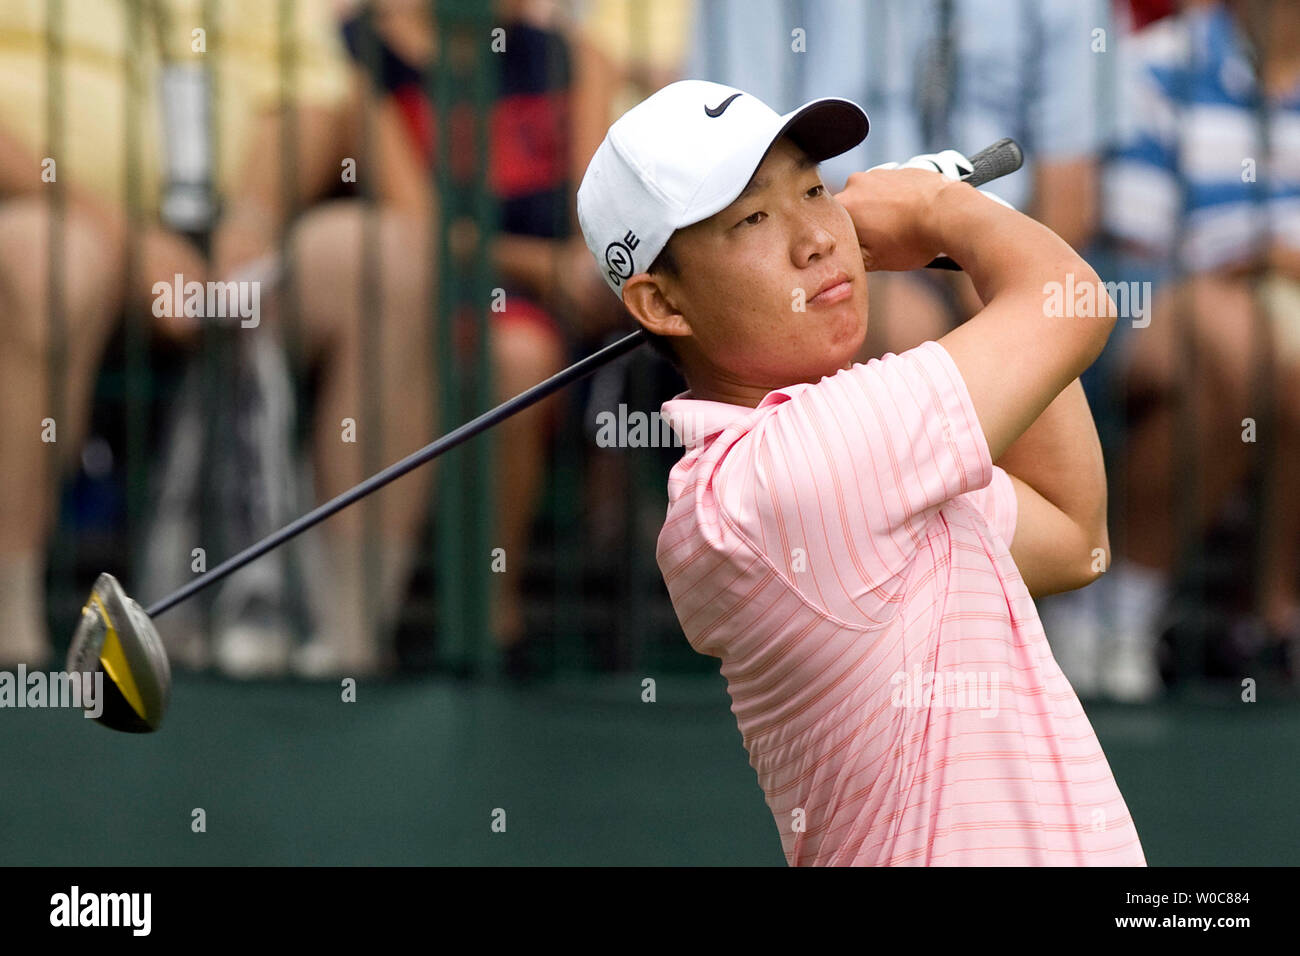 Anthony Kim watches his drive off the 1st tee box during the final round at the AT&T National hosted by Tiger Woods at the Congressional Country Club in Potomac, Maryland  on July 6, 2008. (UPI Photo/Patrick D. McDermott) Stock Photo